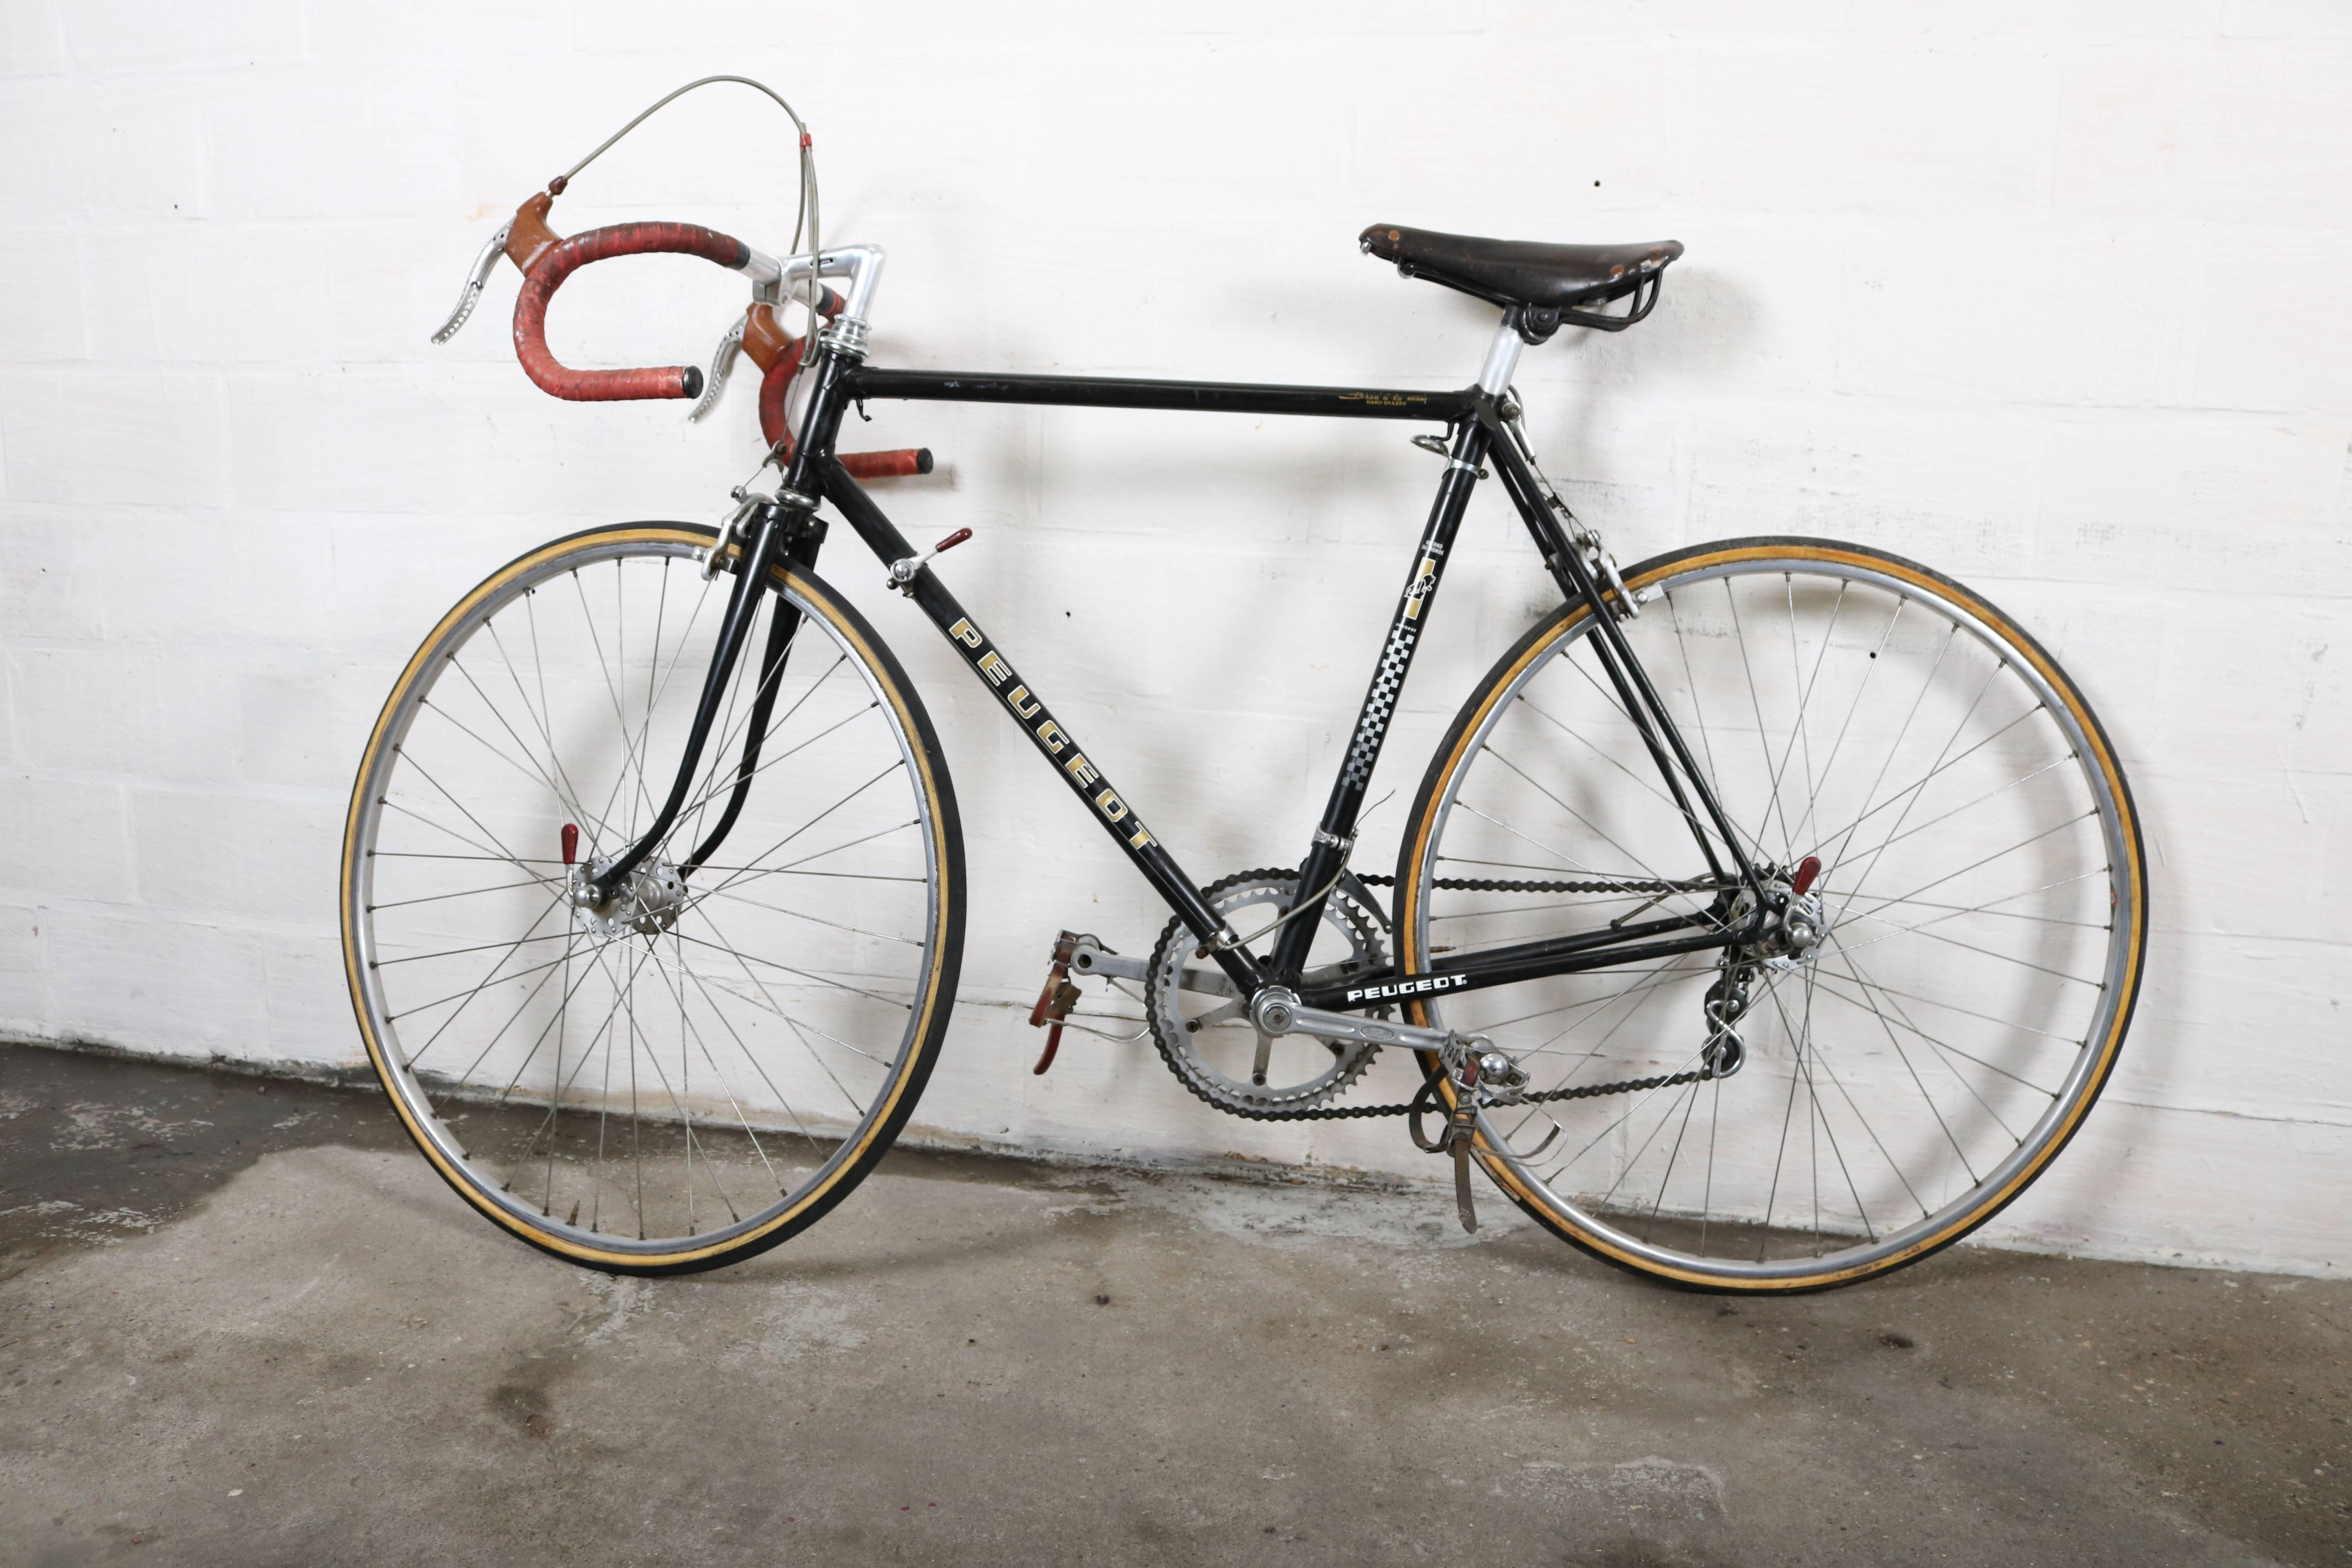 Vintage bicycle from Peugeot, circa 1960.
Is completely original and without restorations.
Ready to use.